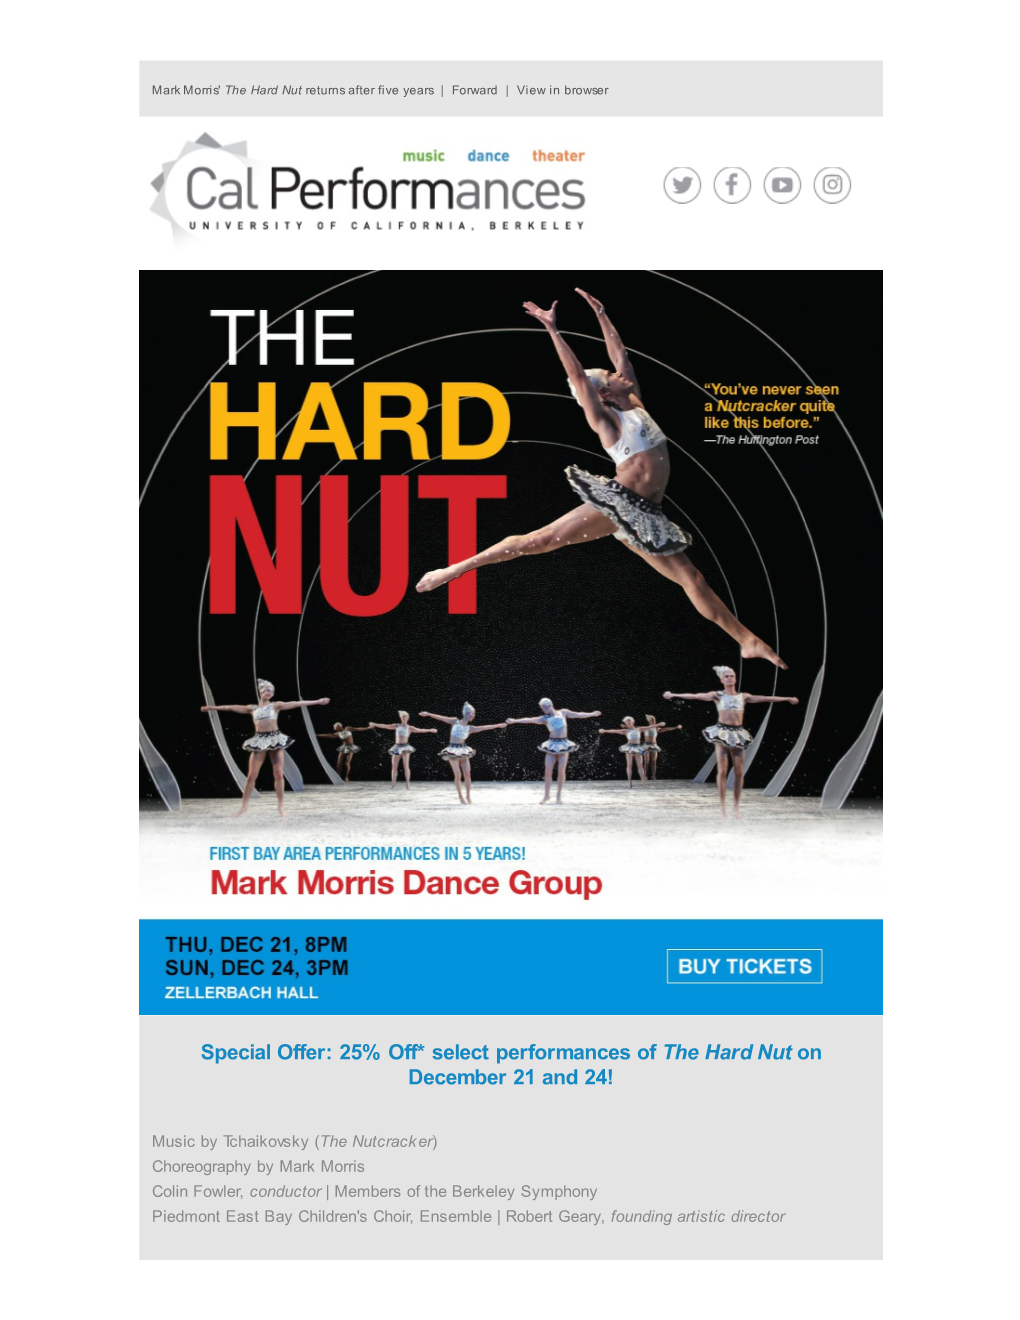 25% Off* Select Performances of the Hard Nut on December 21 and 24!